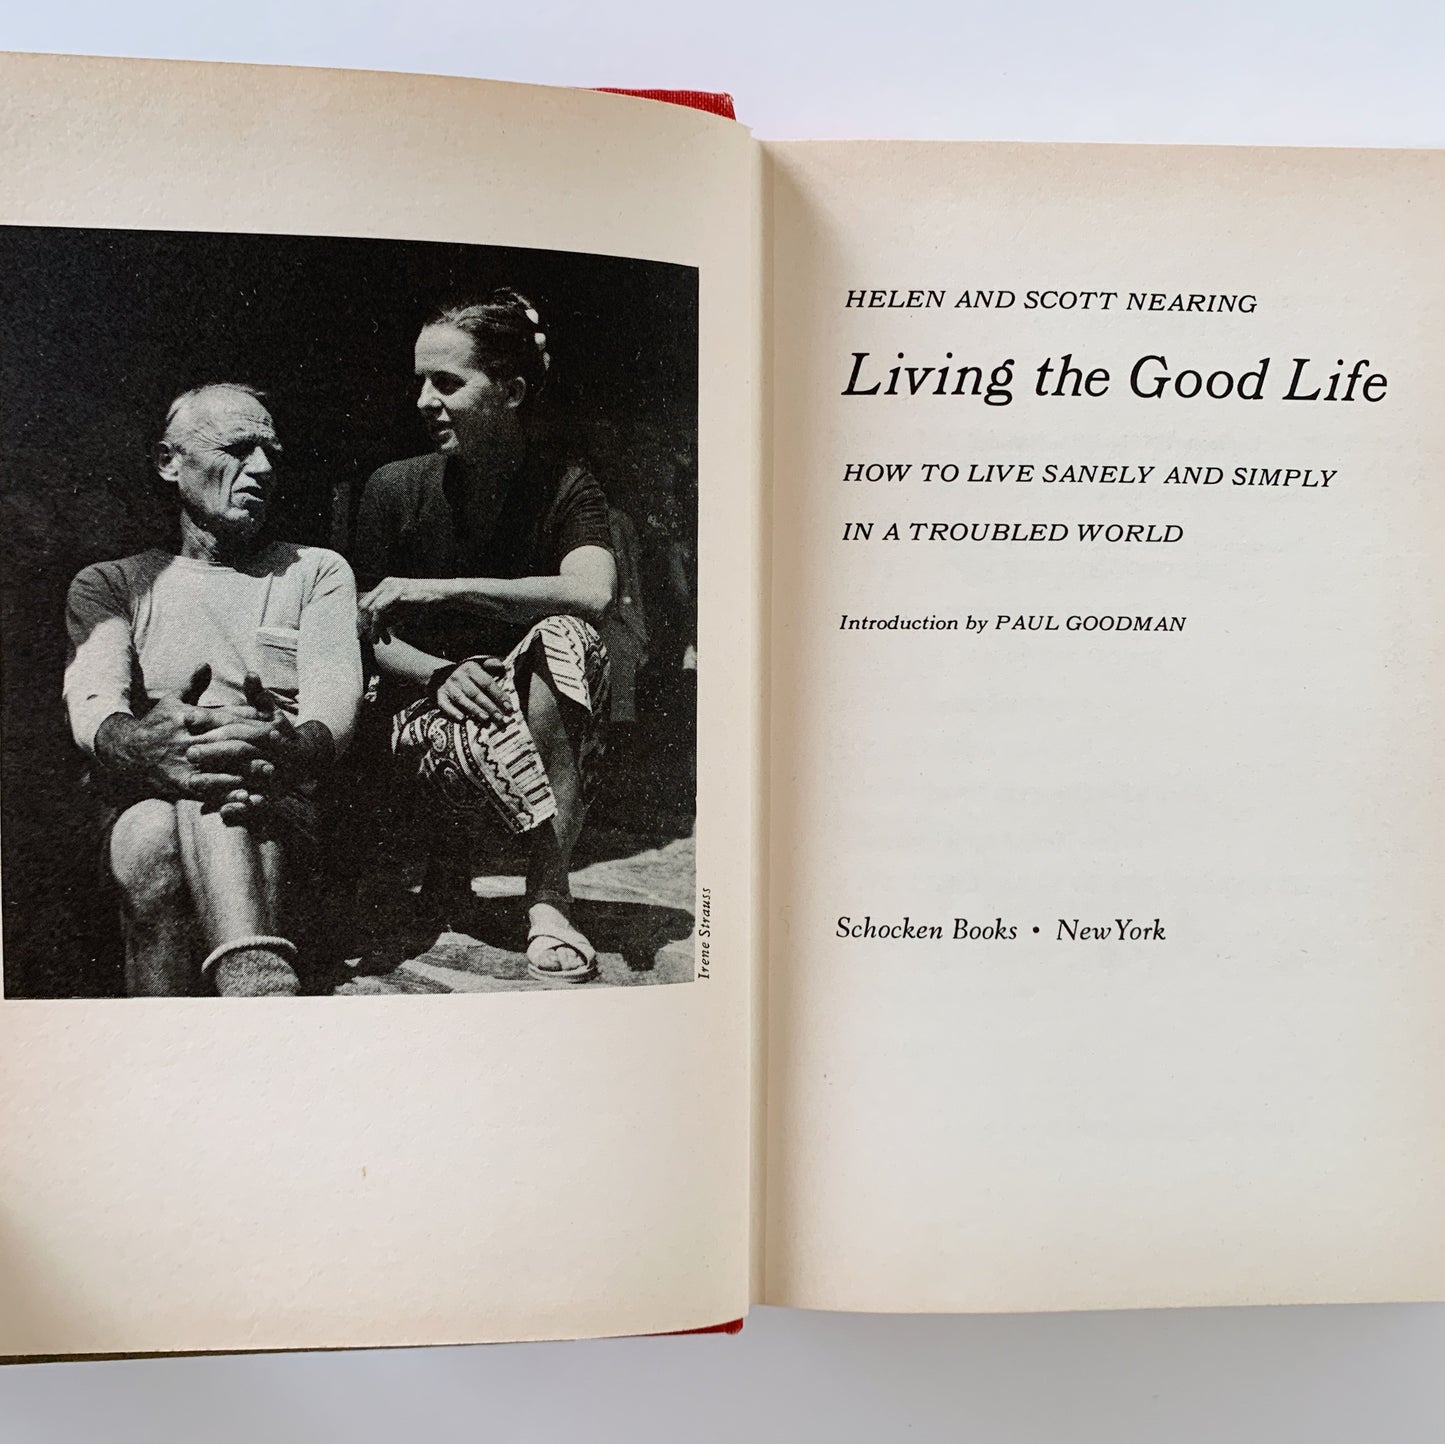 Living the Good Life, Helen and Scott Nearing, 1970 Hardcover with DJ